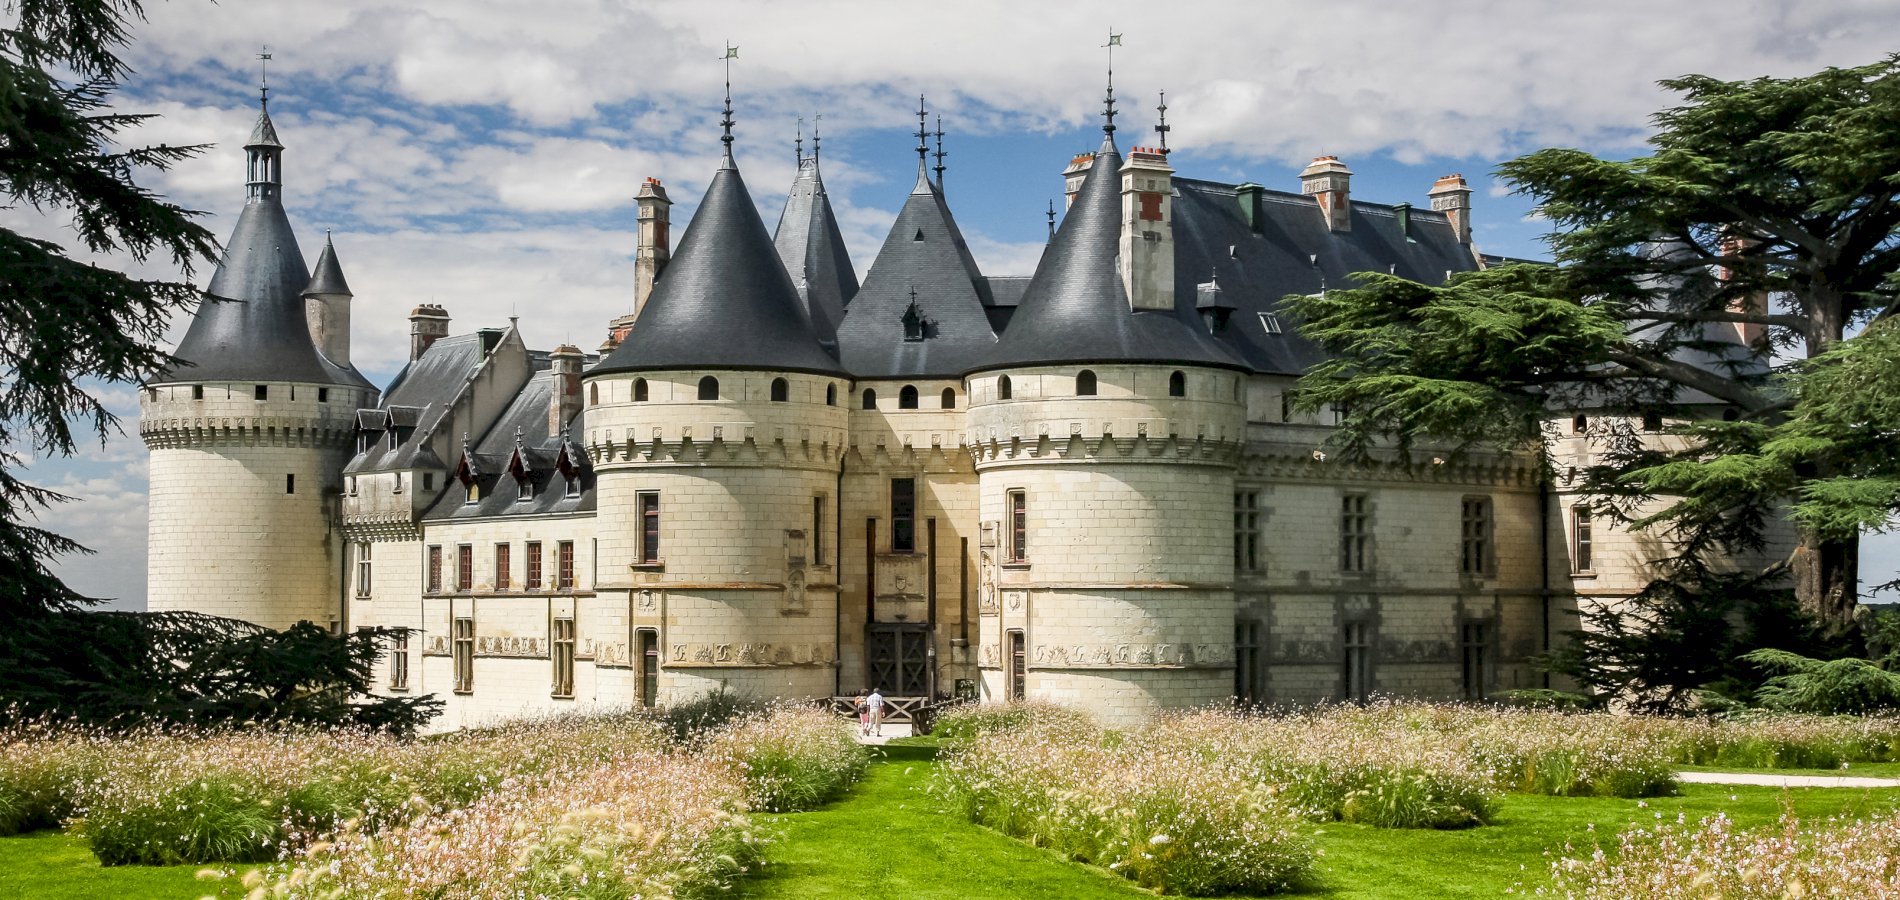 Ophorus Tours - A Private Loire Valley Day Trip from Tours to Chaumont & Chambord Castles